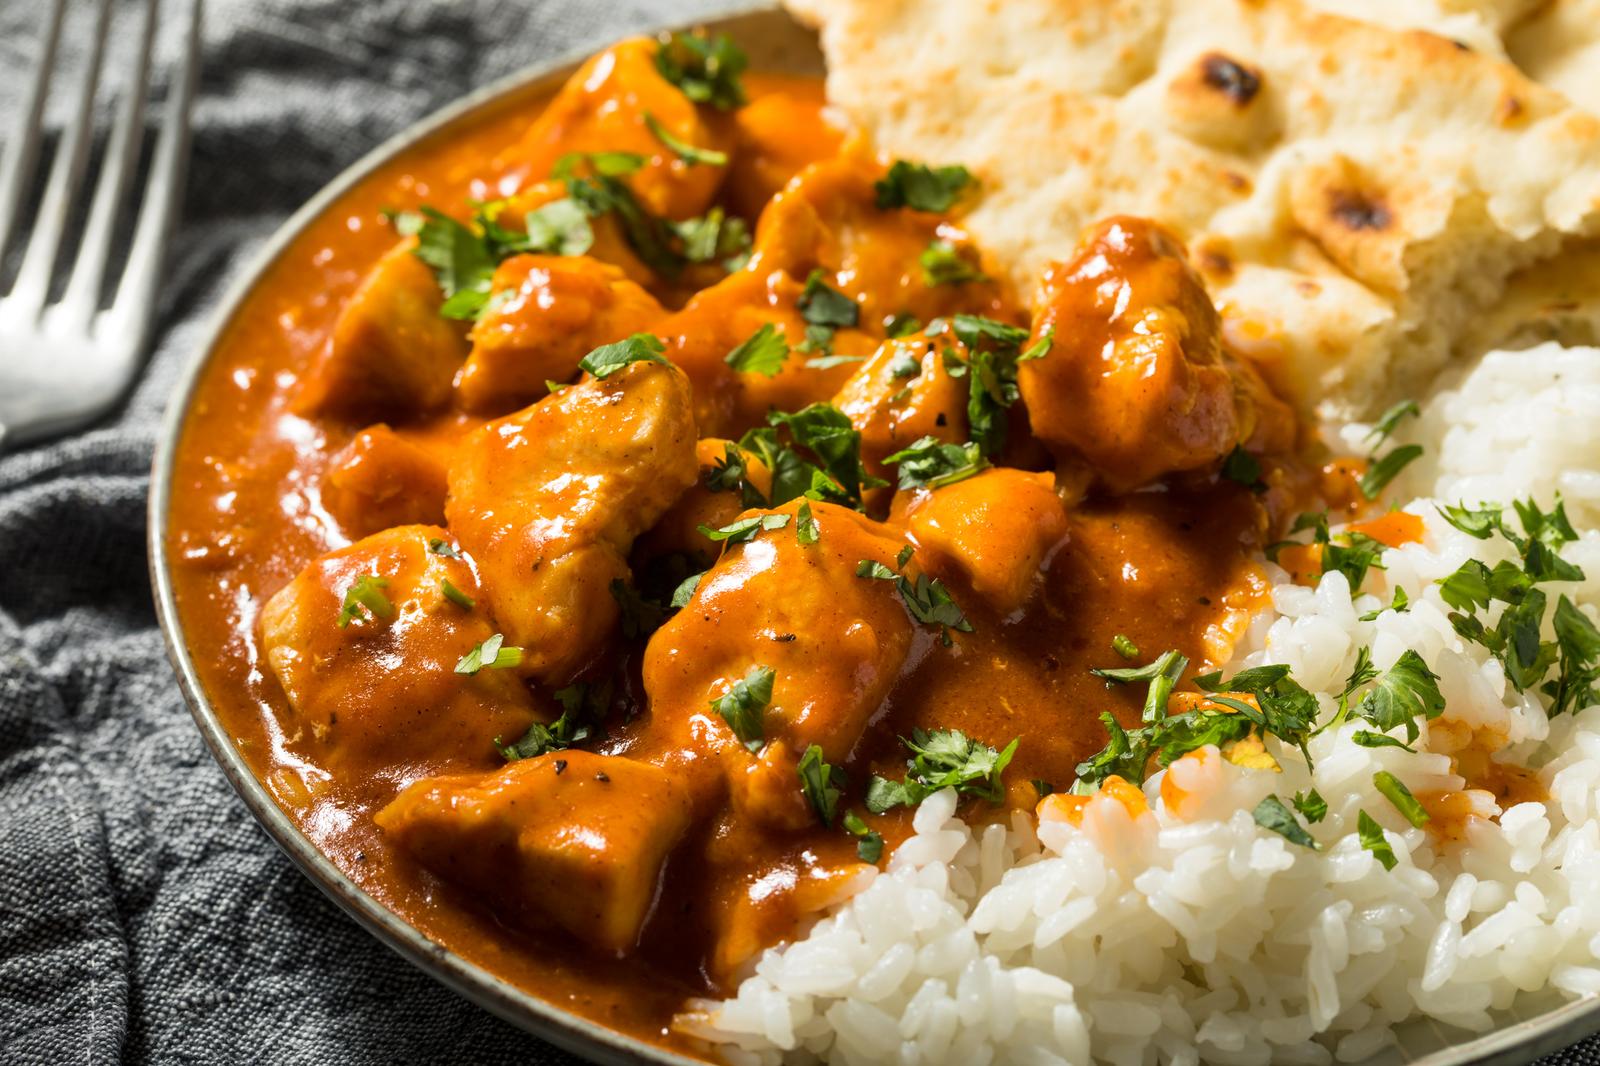 You got: Indian Butter Chicken! Travel to All the World Capitals and We’ll Reveal Your Ultimate Comfort Food